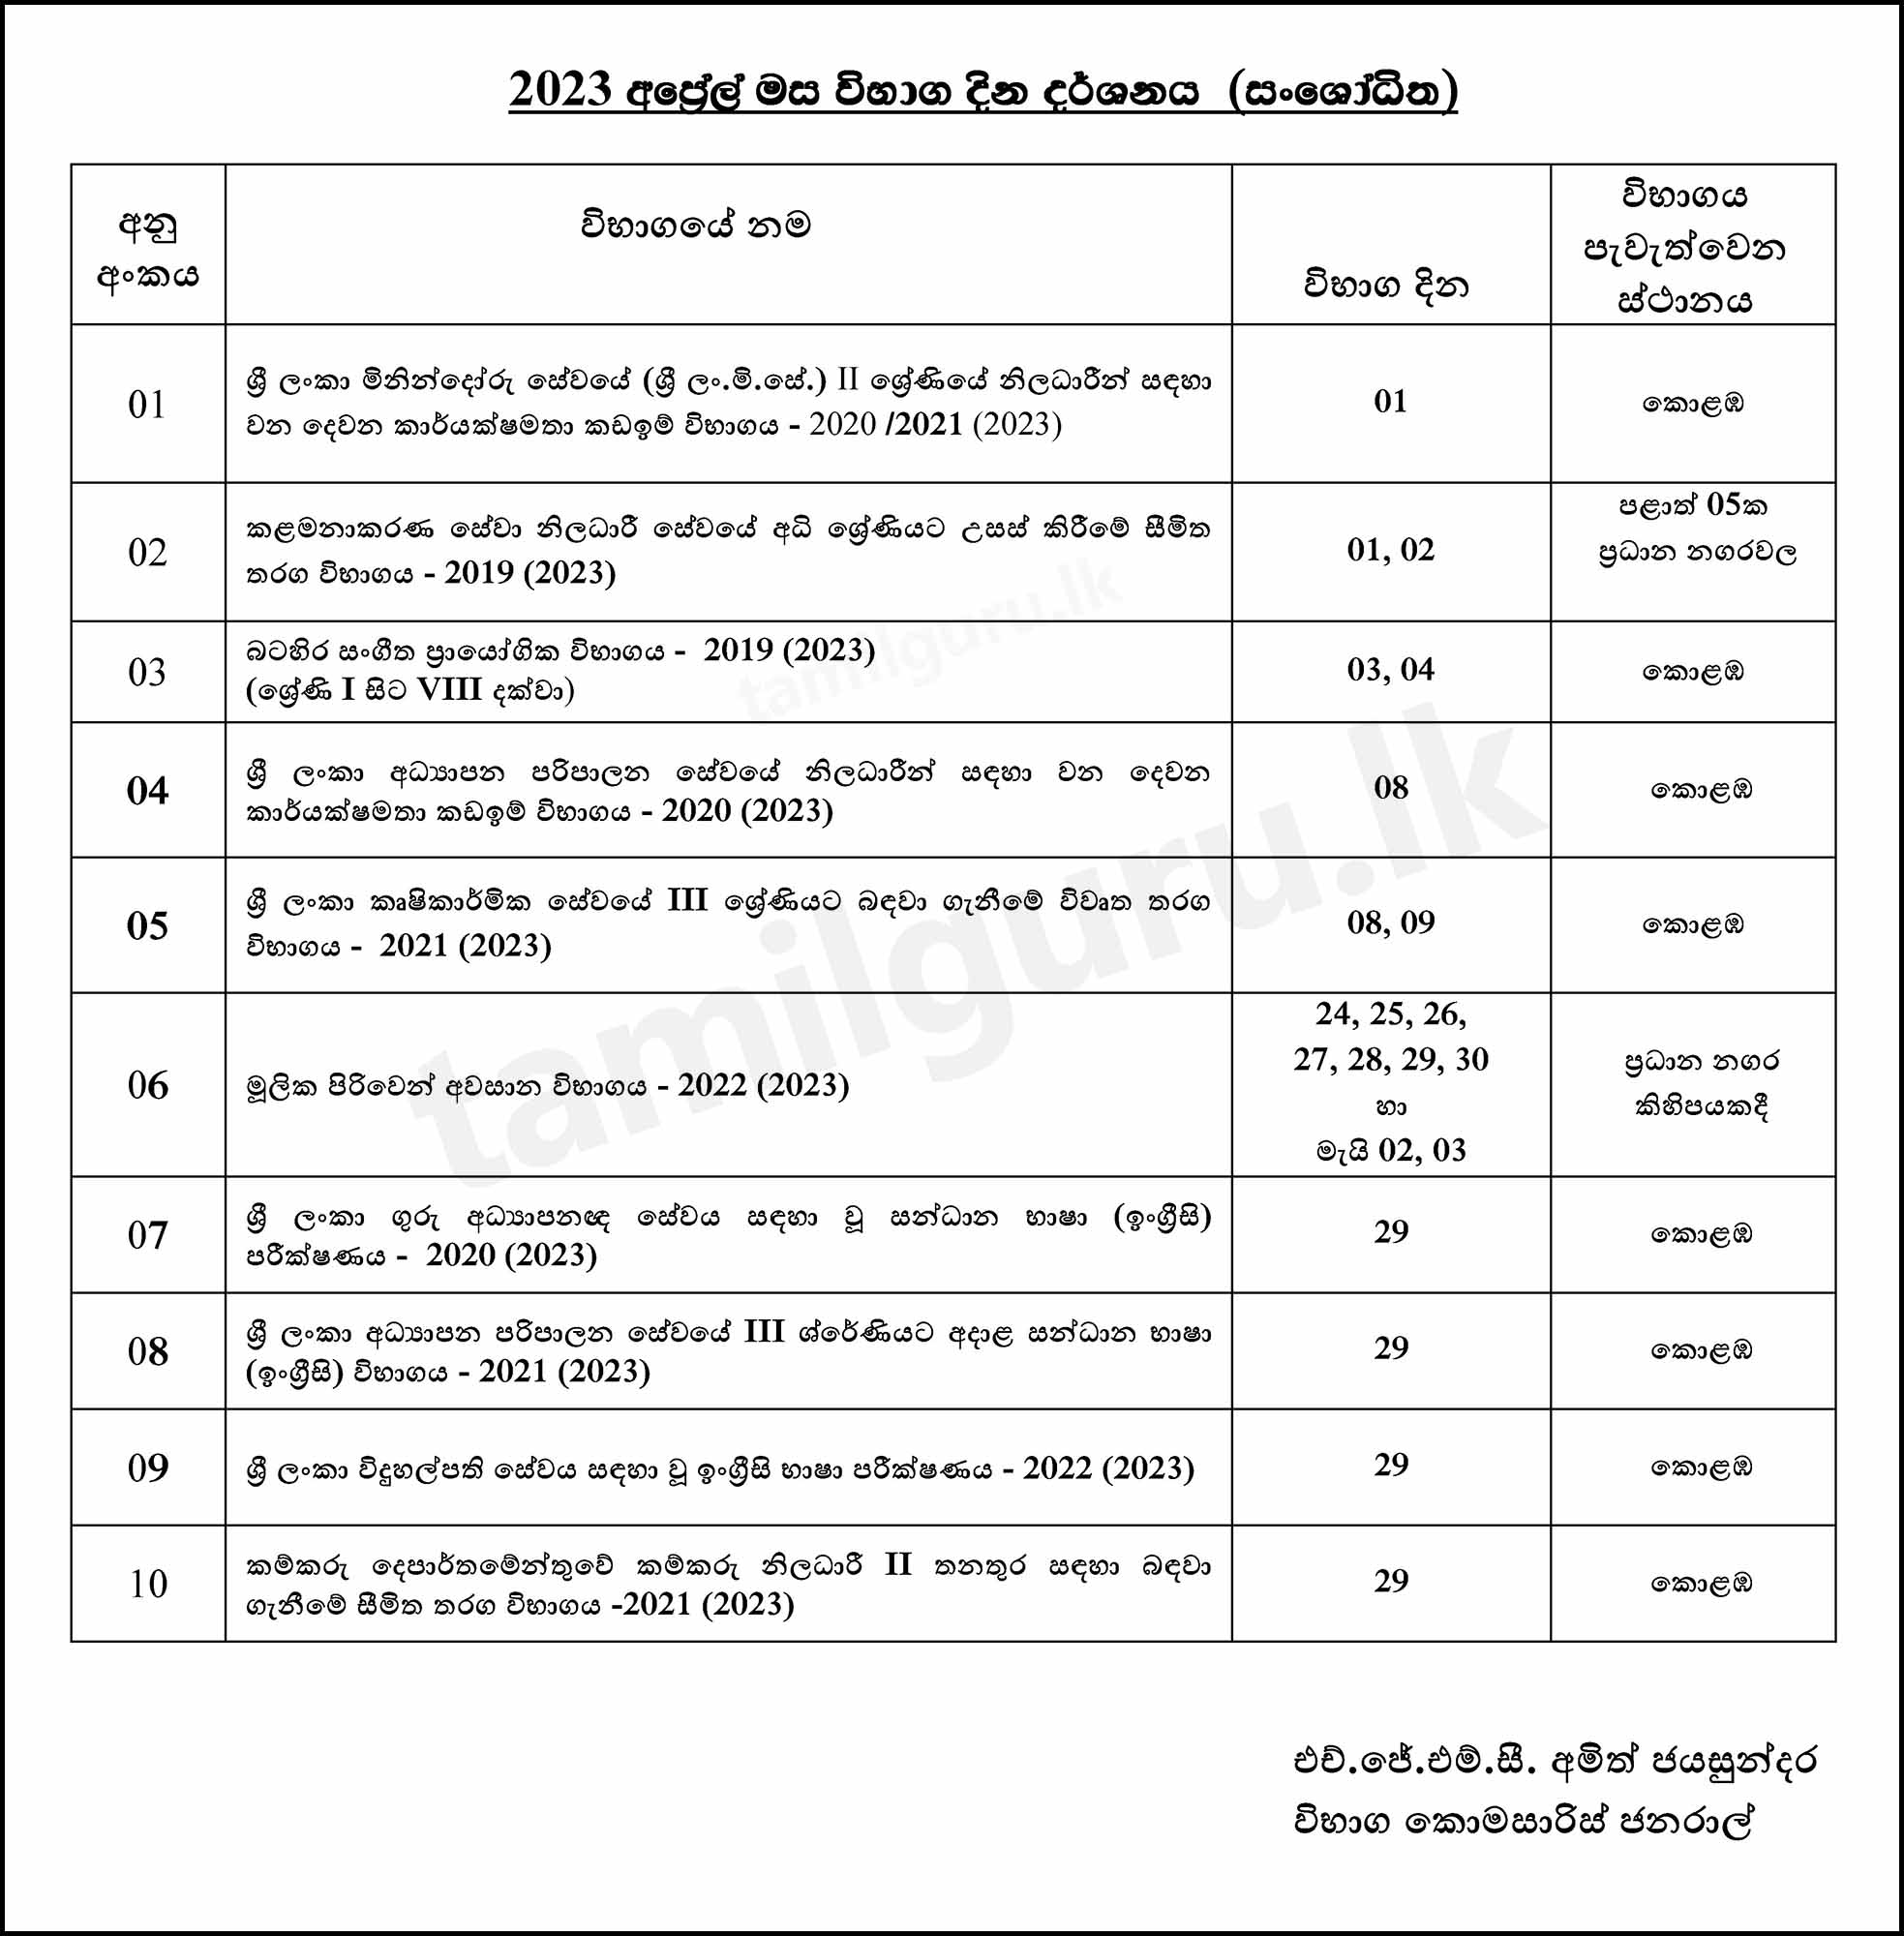 Examination Calendar for April 2023 (Amended) - Department of Examinations